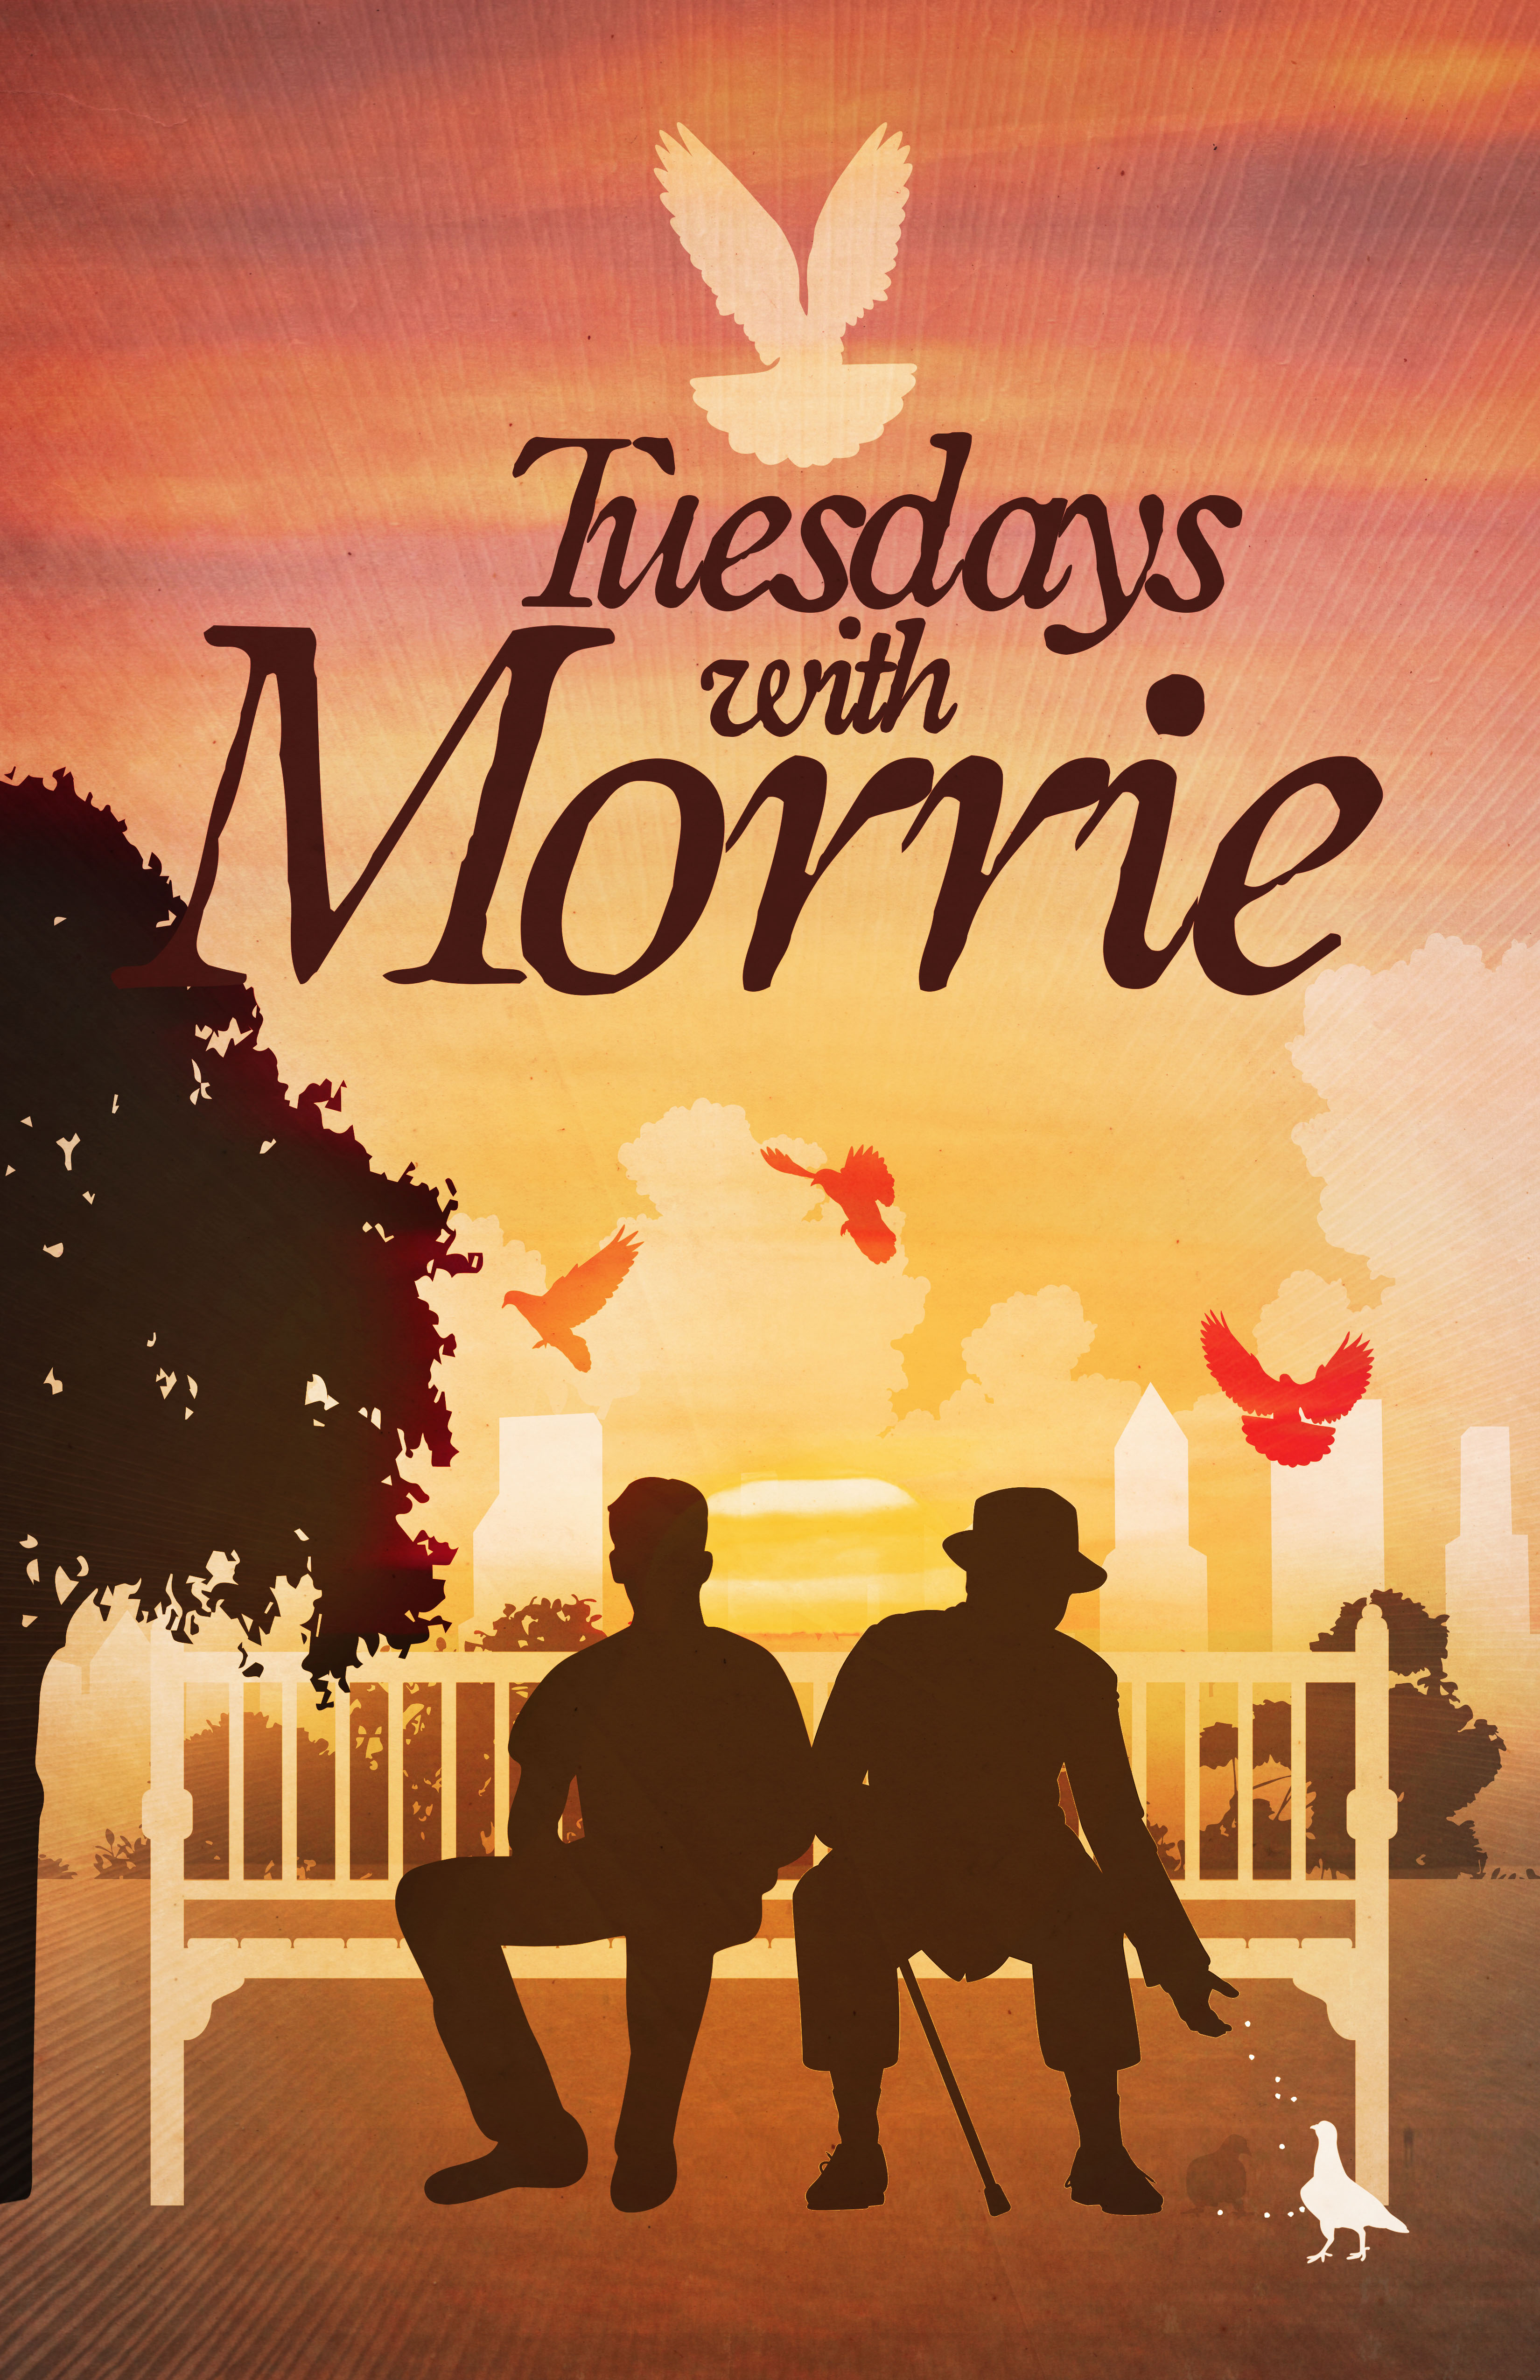 https://www.acttwotheatre.com/wp-content/uploads/2018/11/ActTwo_TUESDAYS_WITH_MORRIE_2.jpg